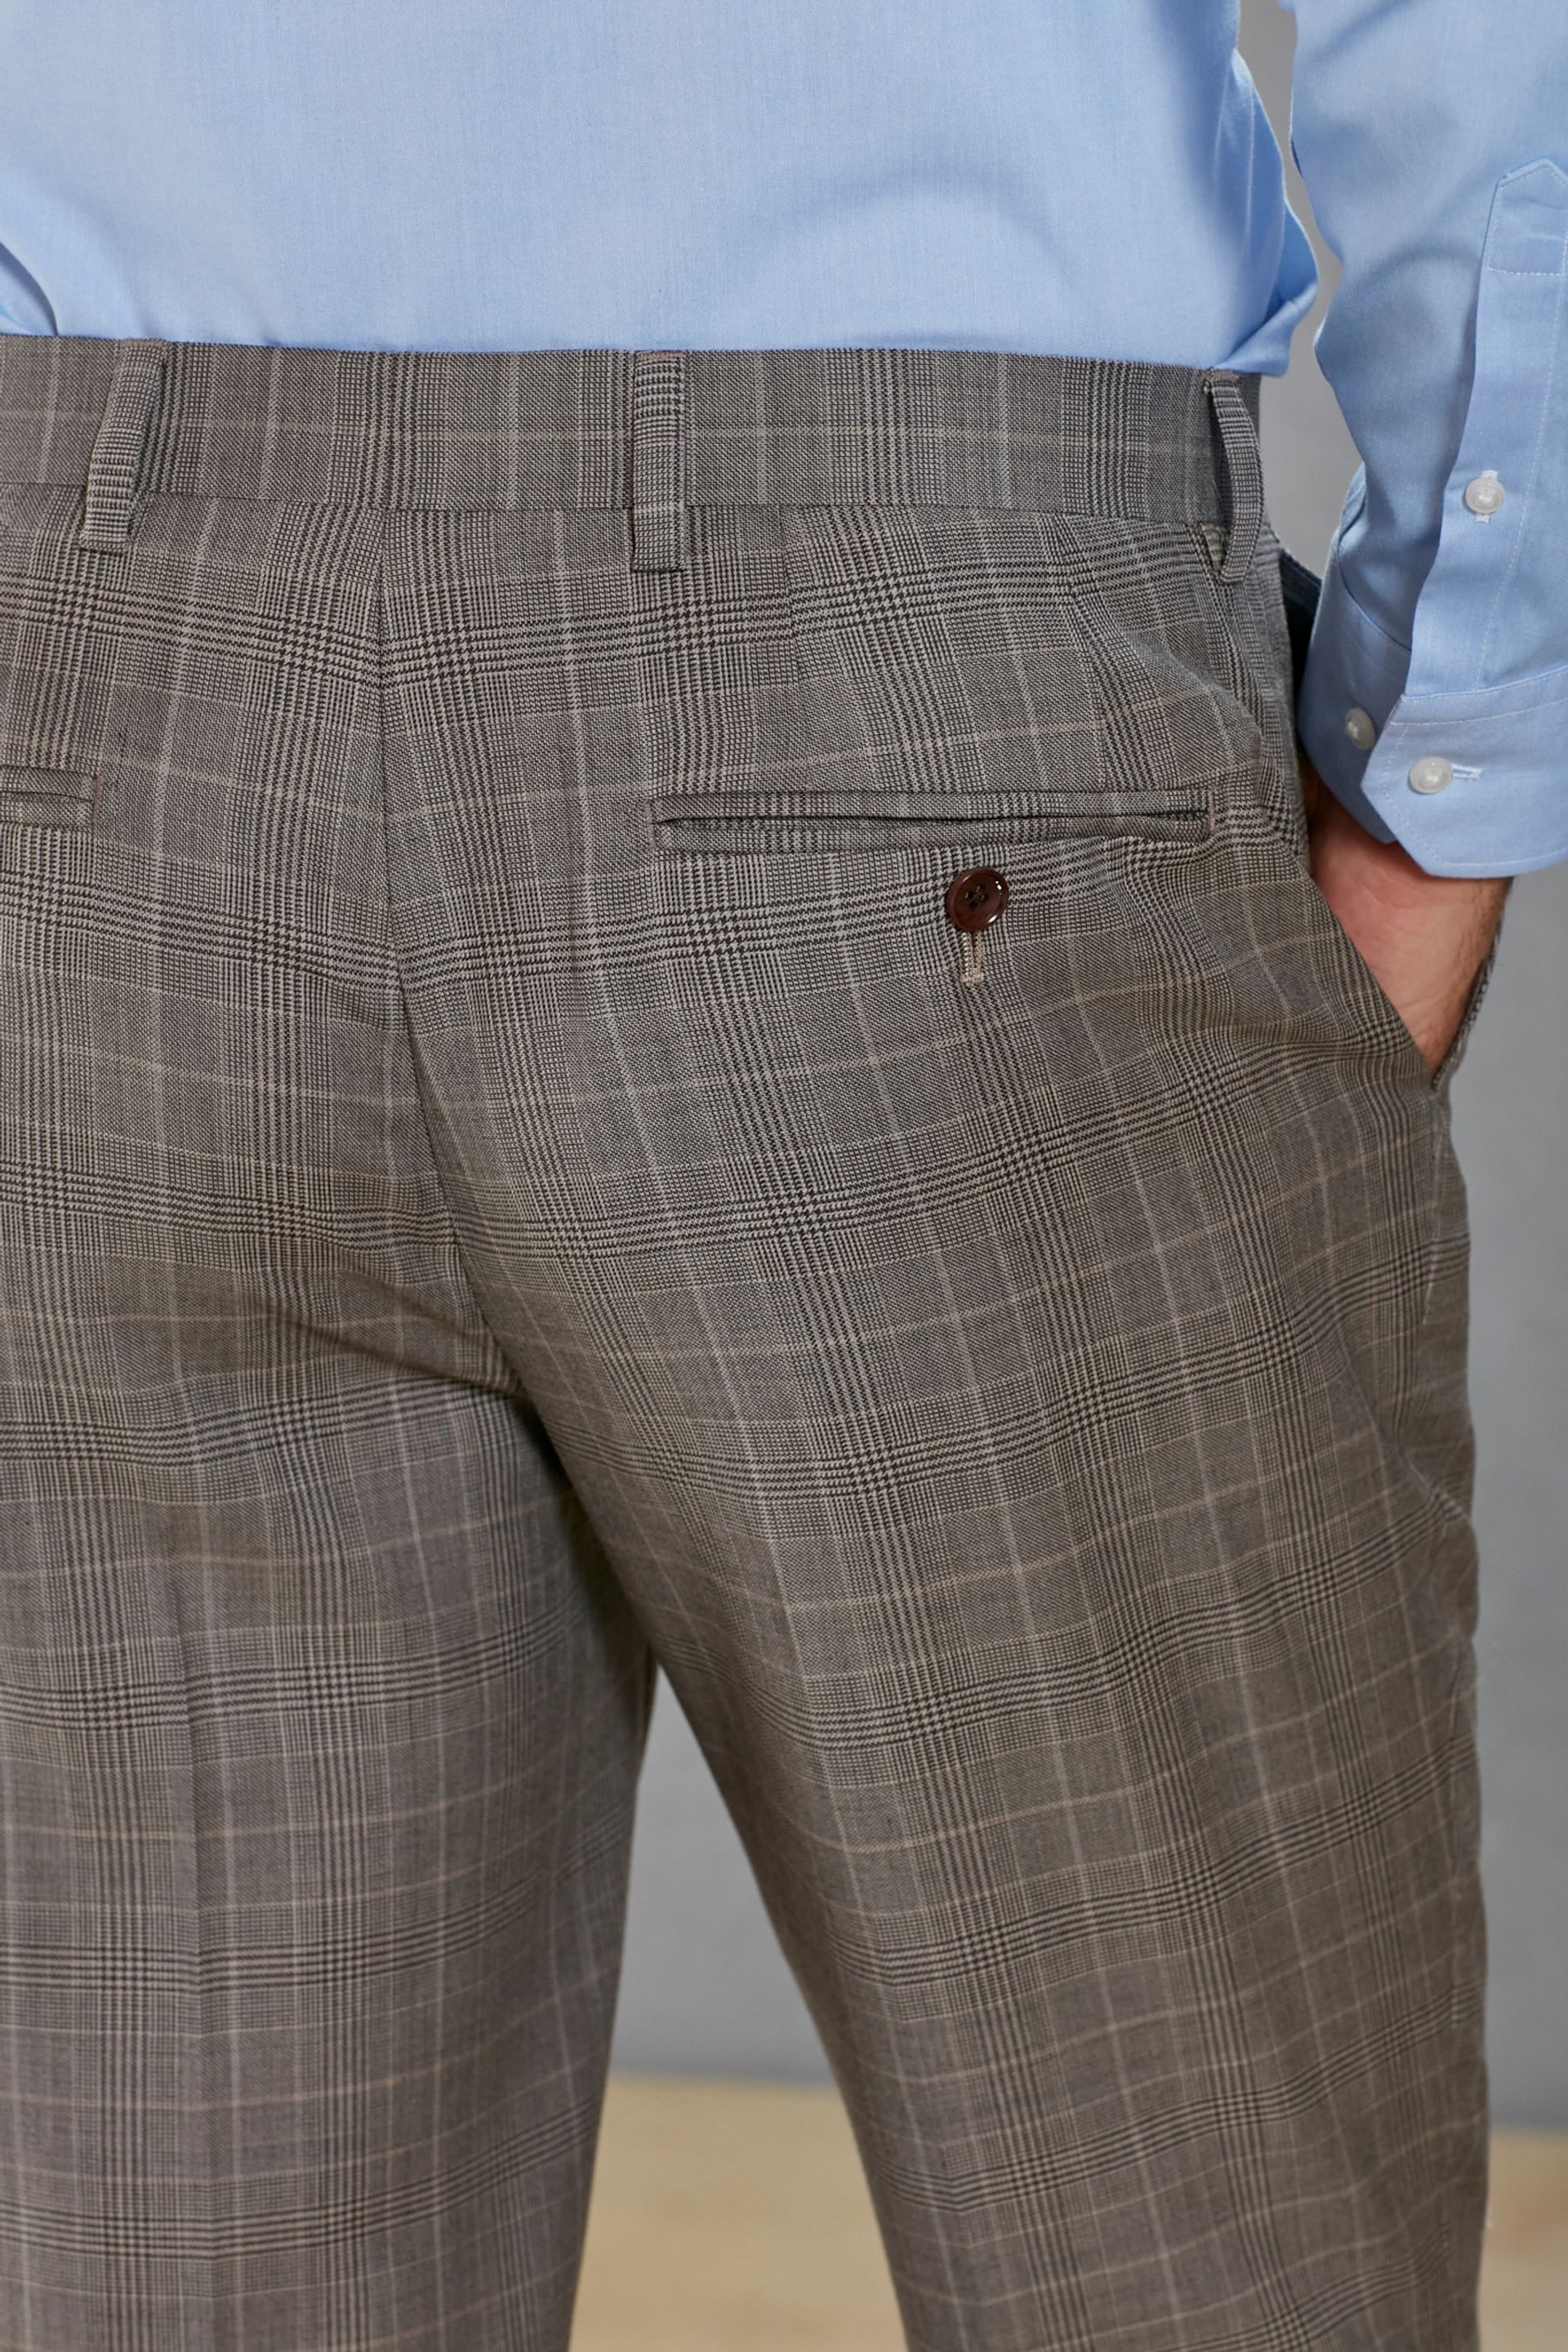 Neutral Signature British Fabric Check Suit: Trousers - Image 6 of 11